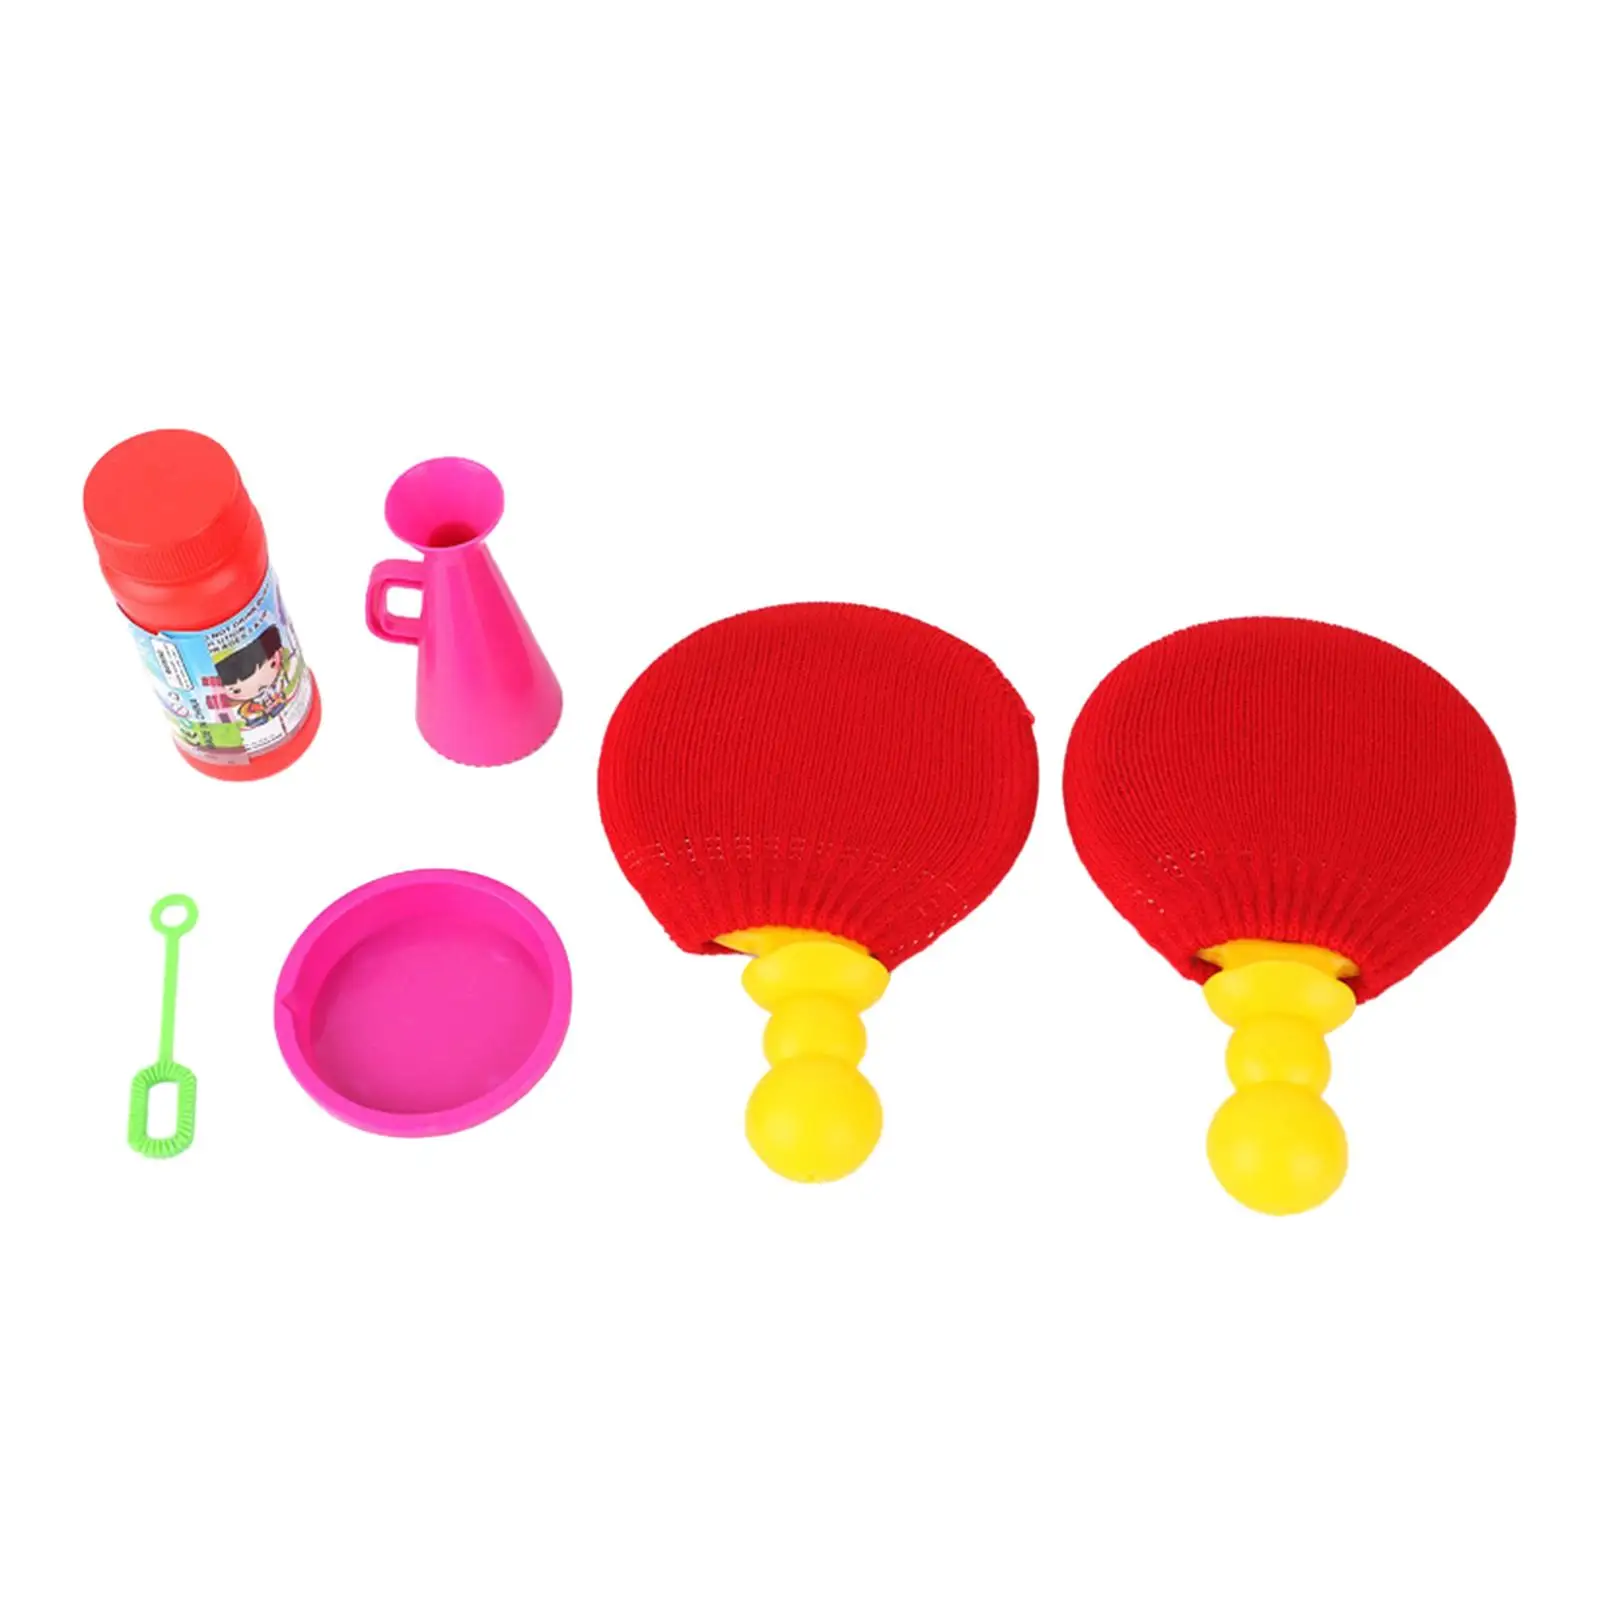 Ping Pong Game with Soap Bubble Indoor and Play Unpoppable Bubbles Solution Toy for Kids Children Girls Boys Great Gift